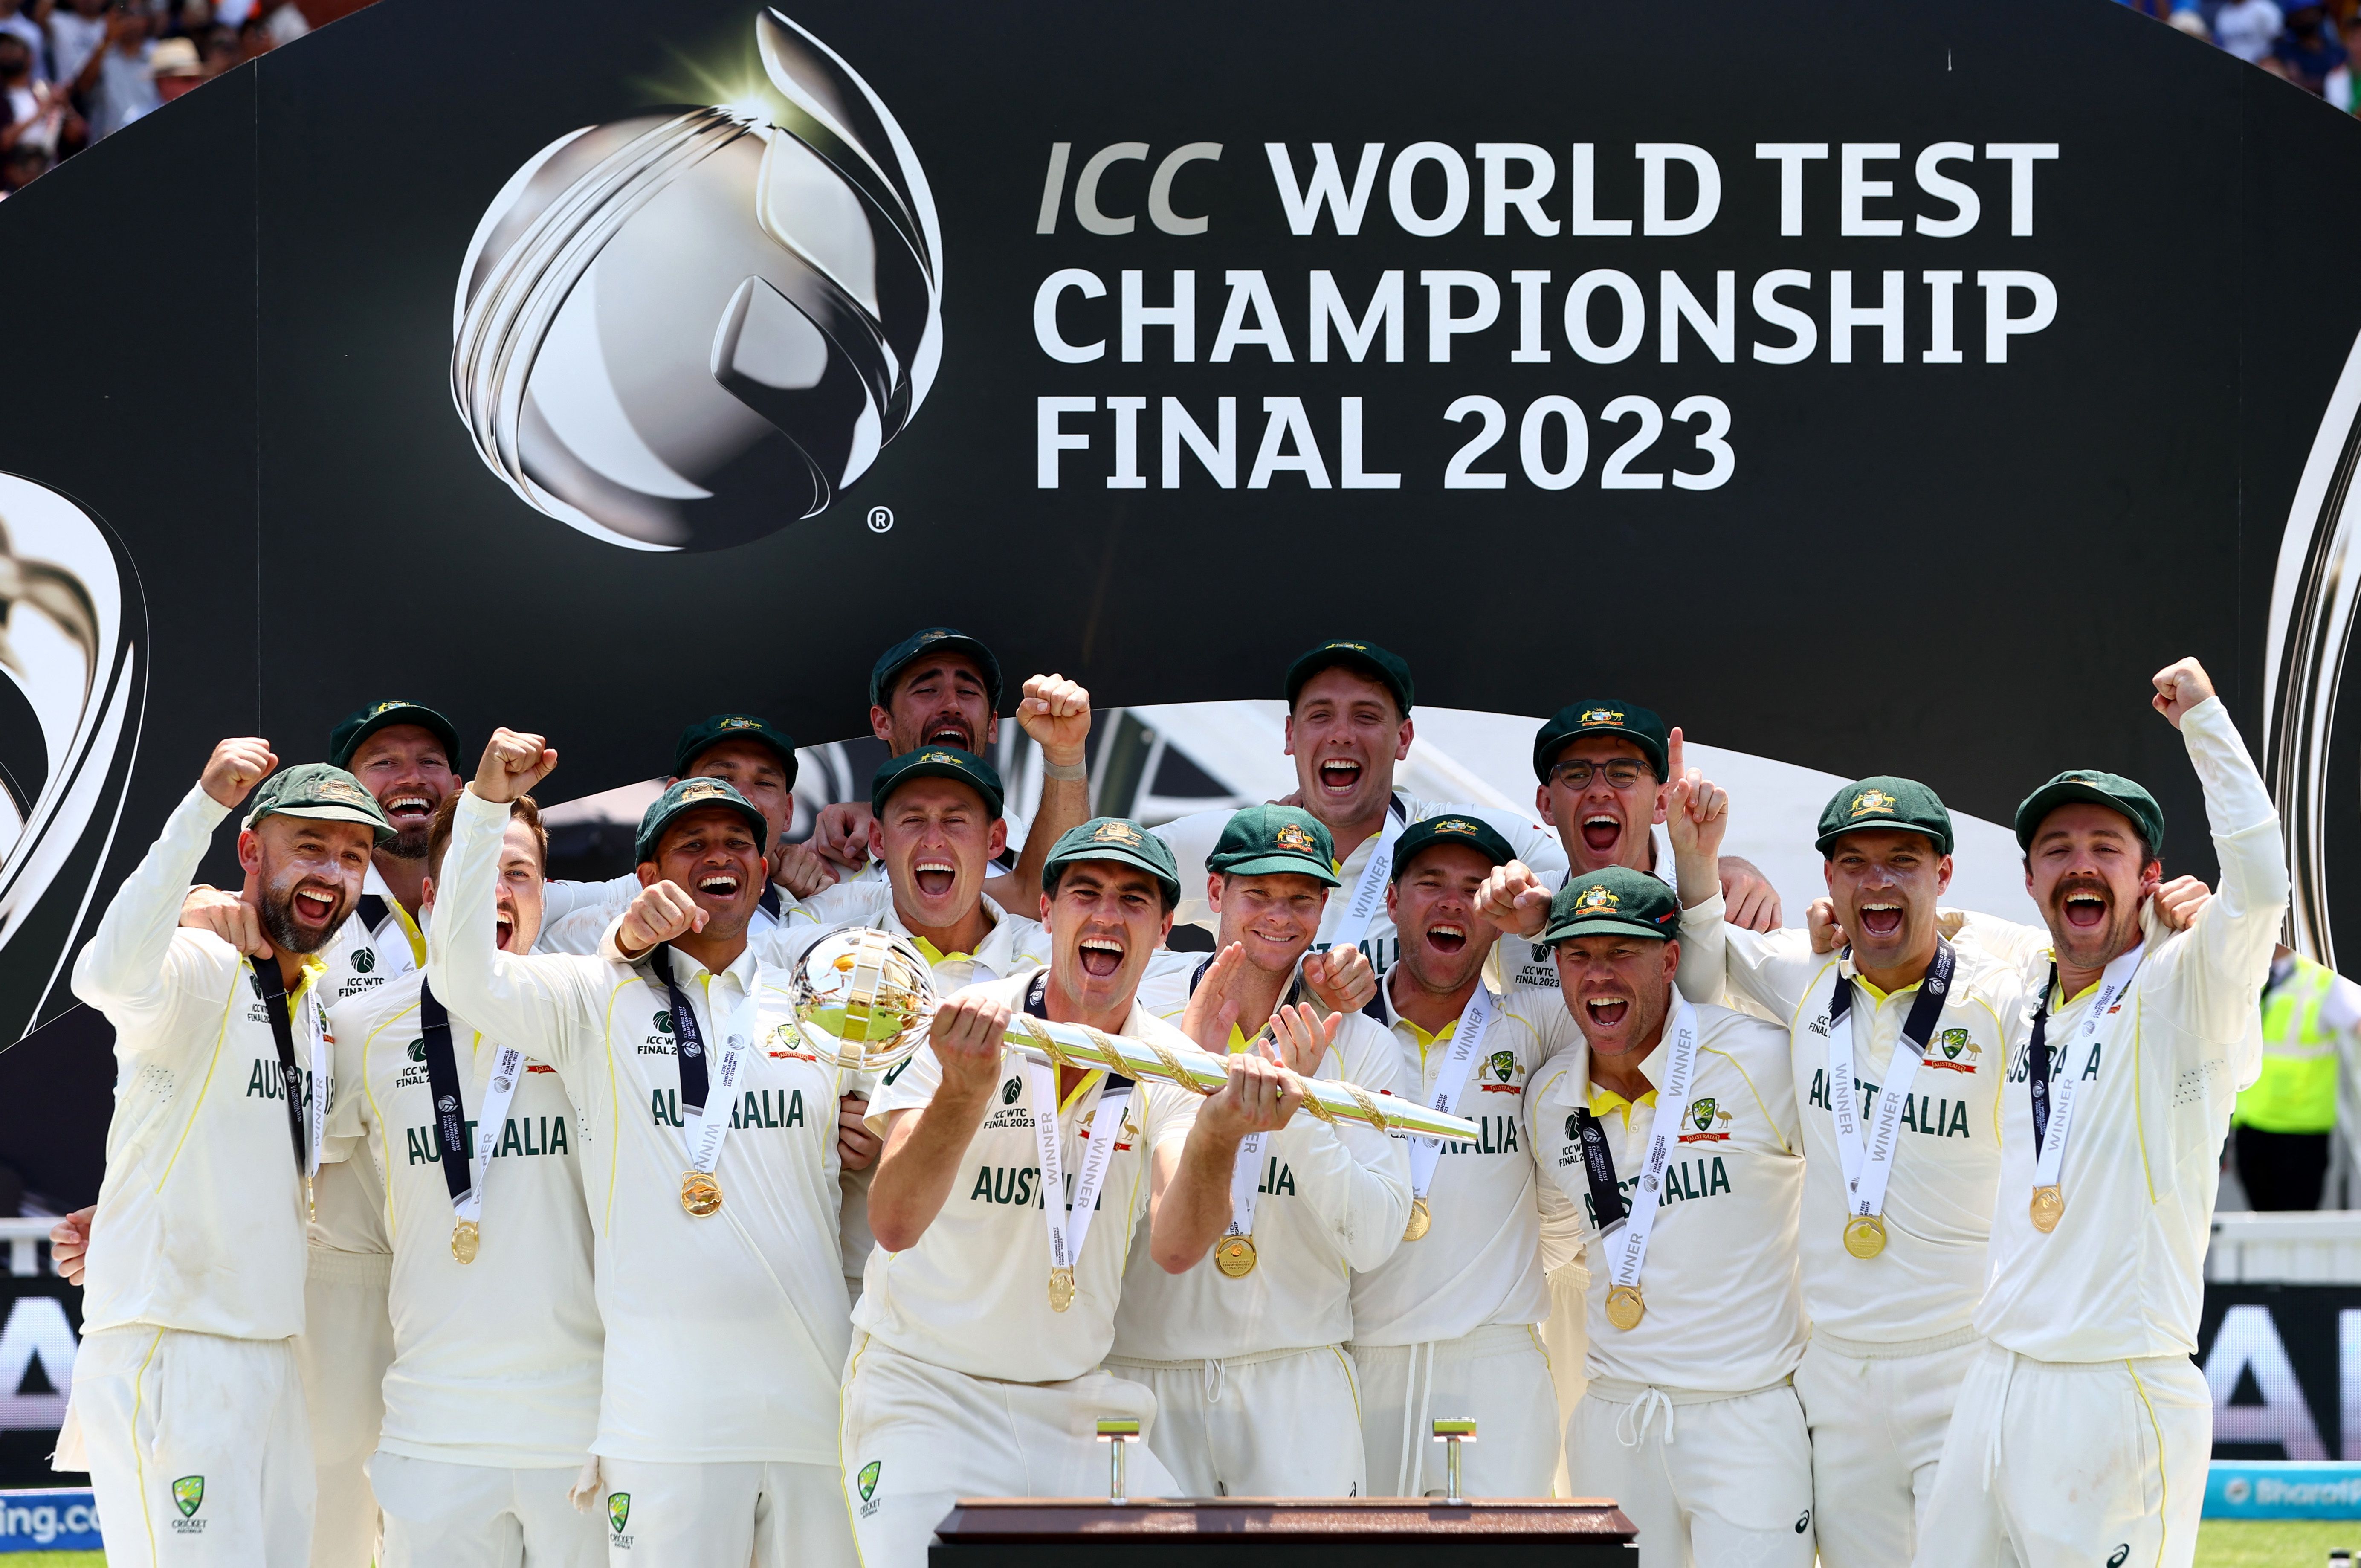 Ashes 2023 Fixtures, Dates, Tickets, and Teams